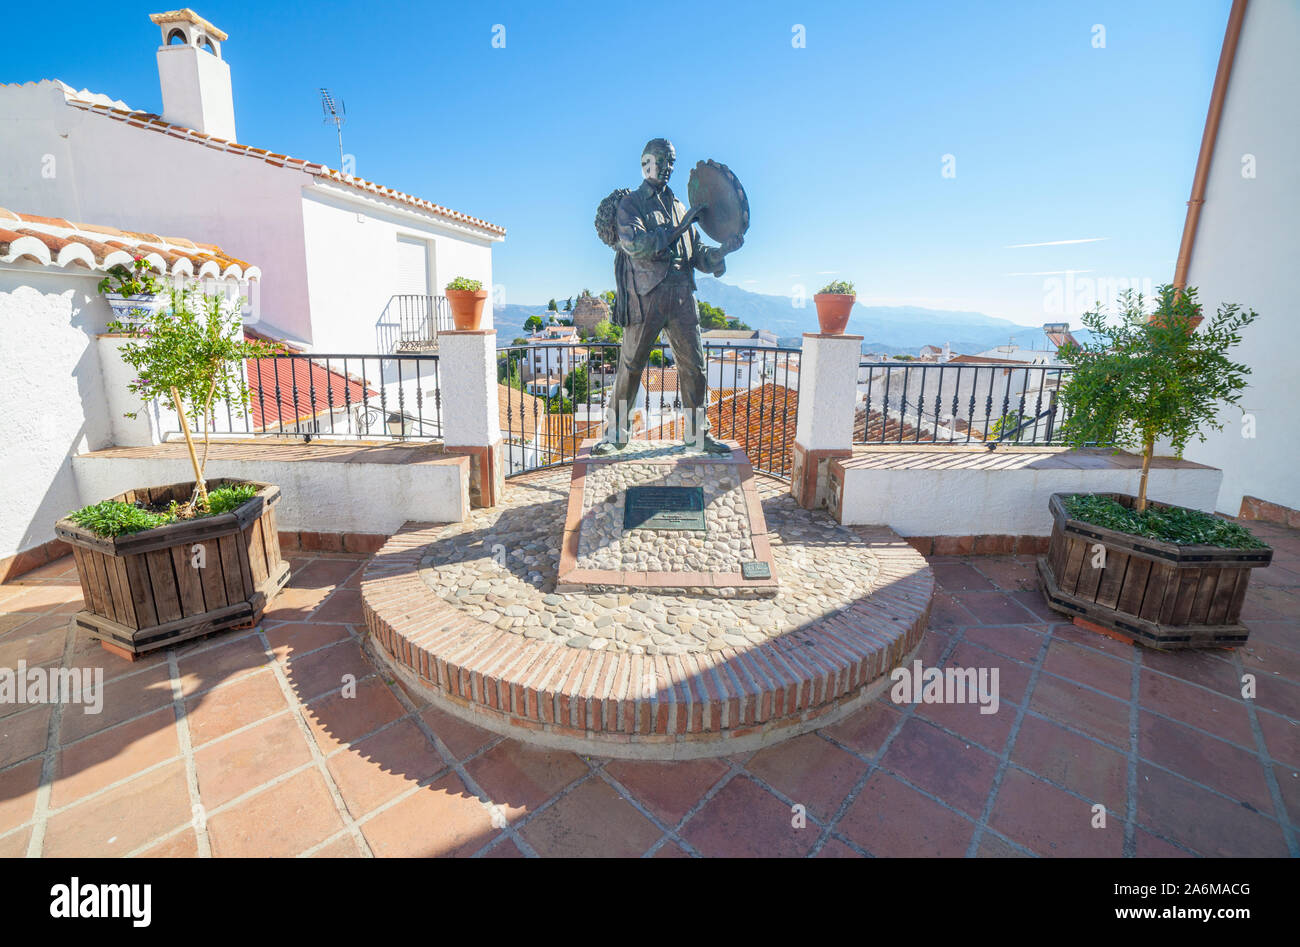 Comares, Spain - Sept 23th, 2018: Statue of the musician Antonio Gallego in Comares, Malaga, Spain. Famous performer of Verdiales Folk Music Stock Photo